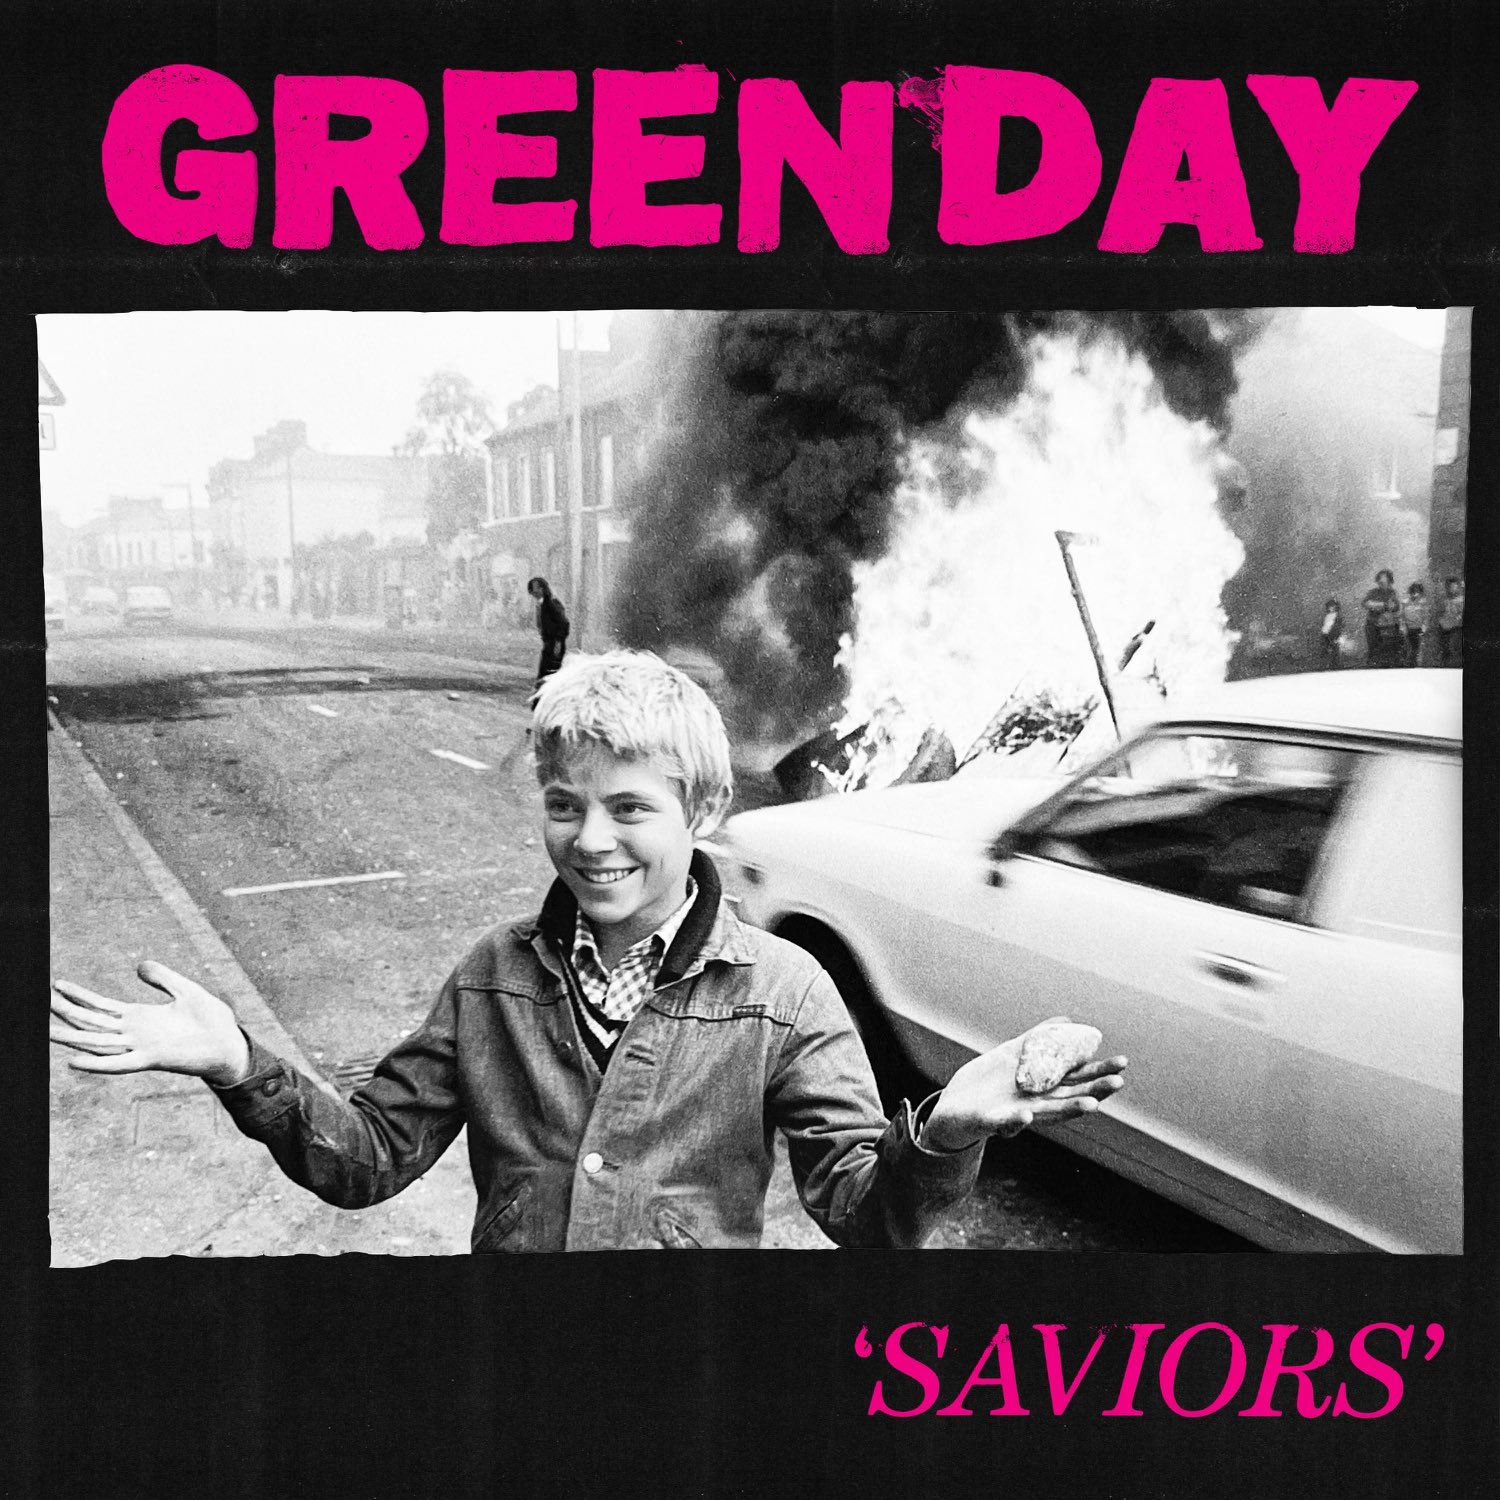 The Green Day album 'Saviors' featuring the altered image